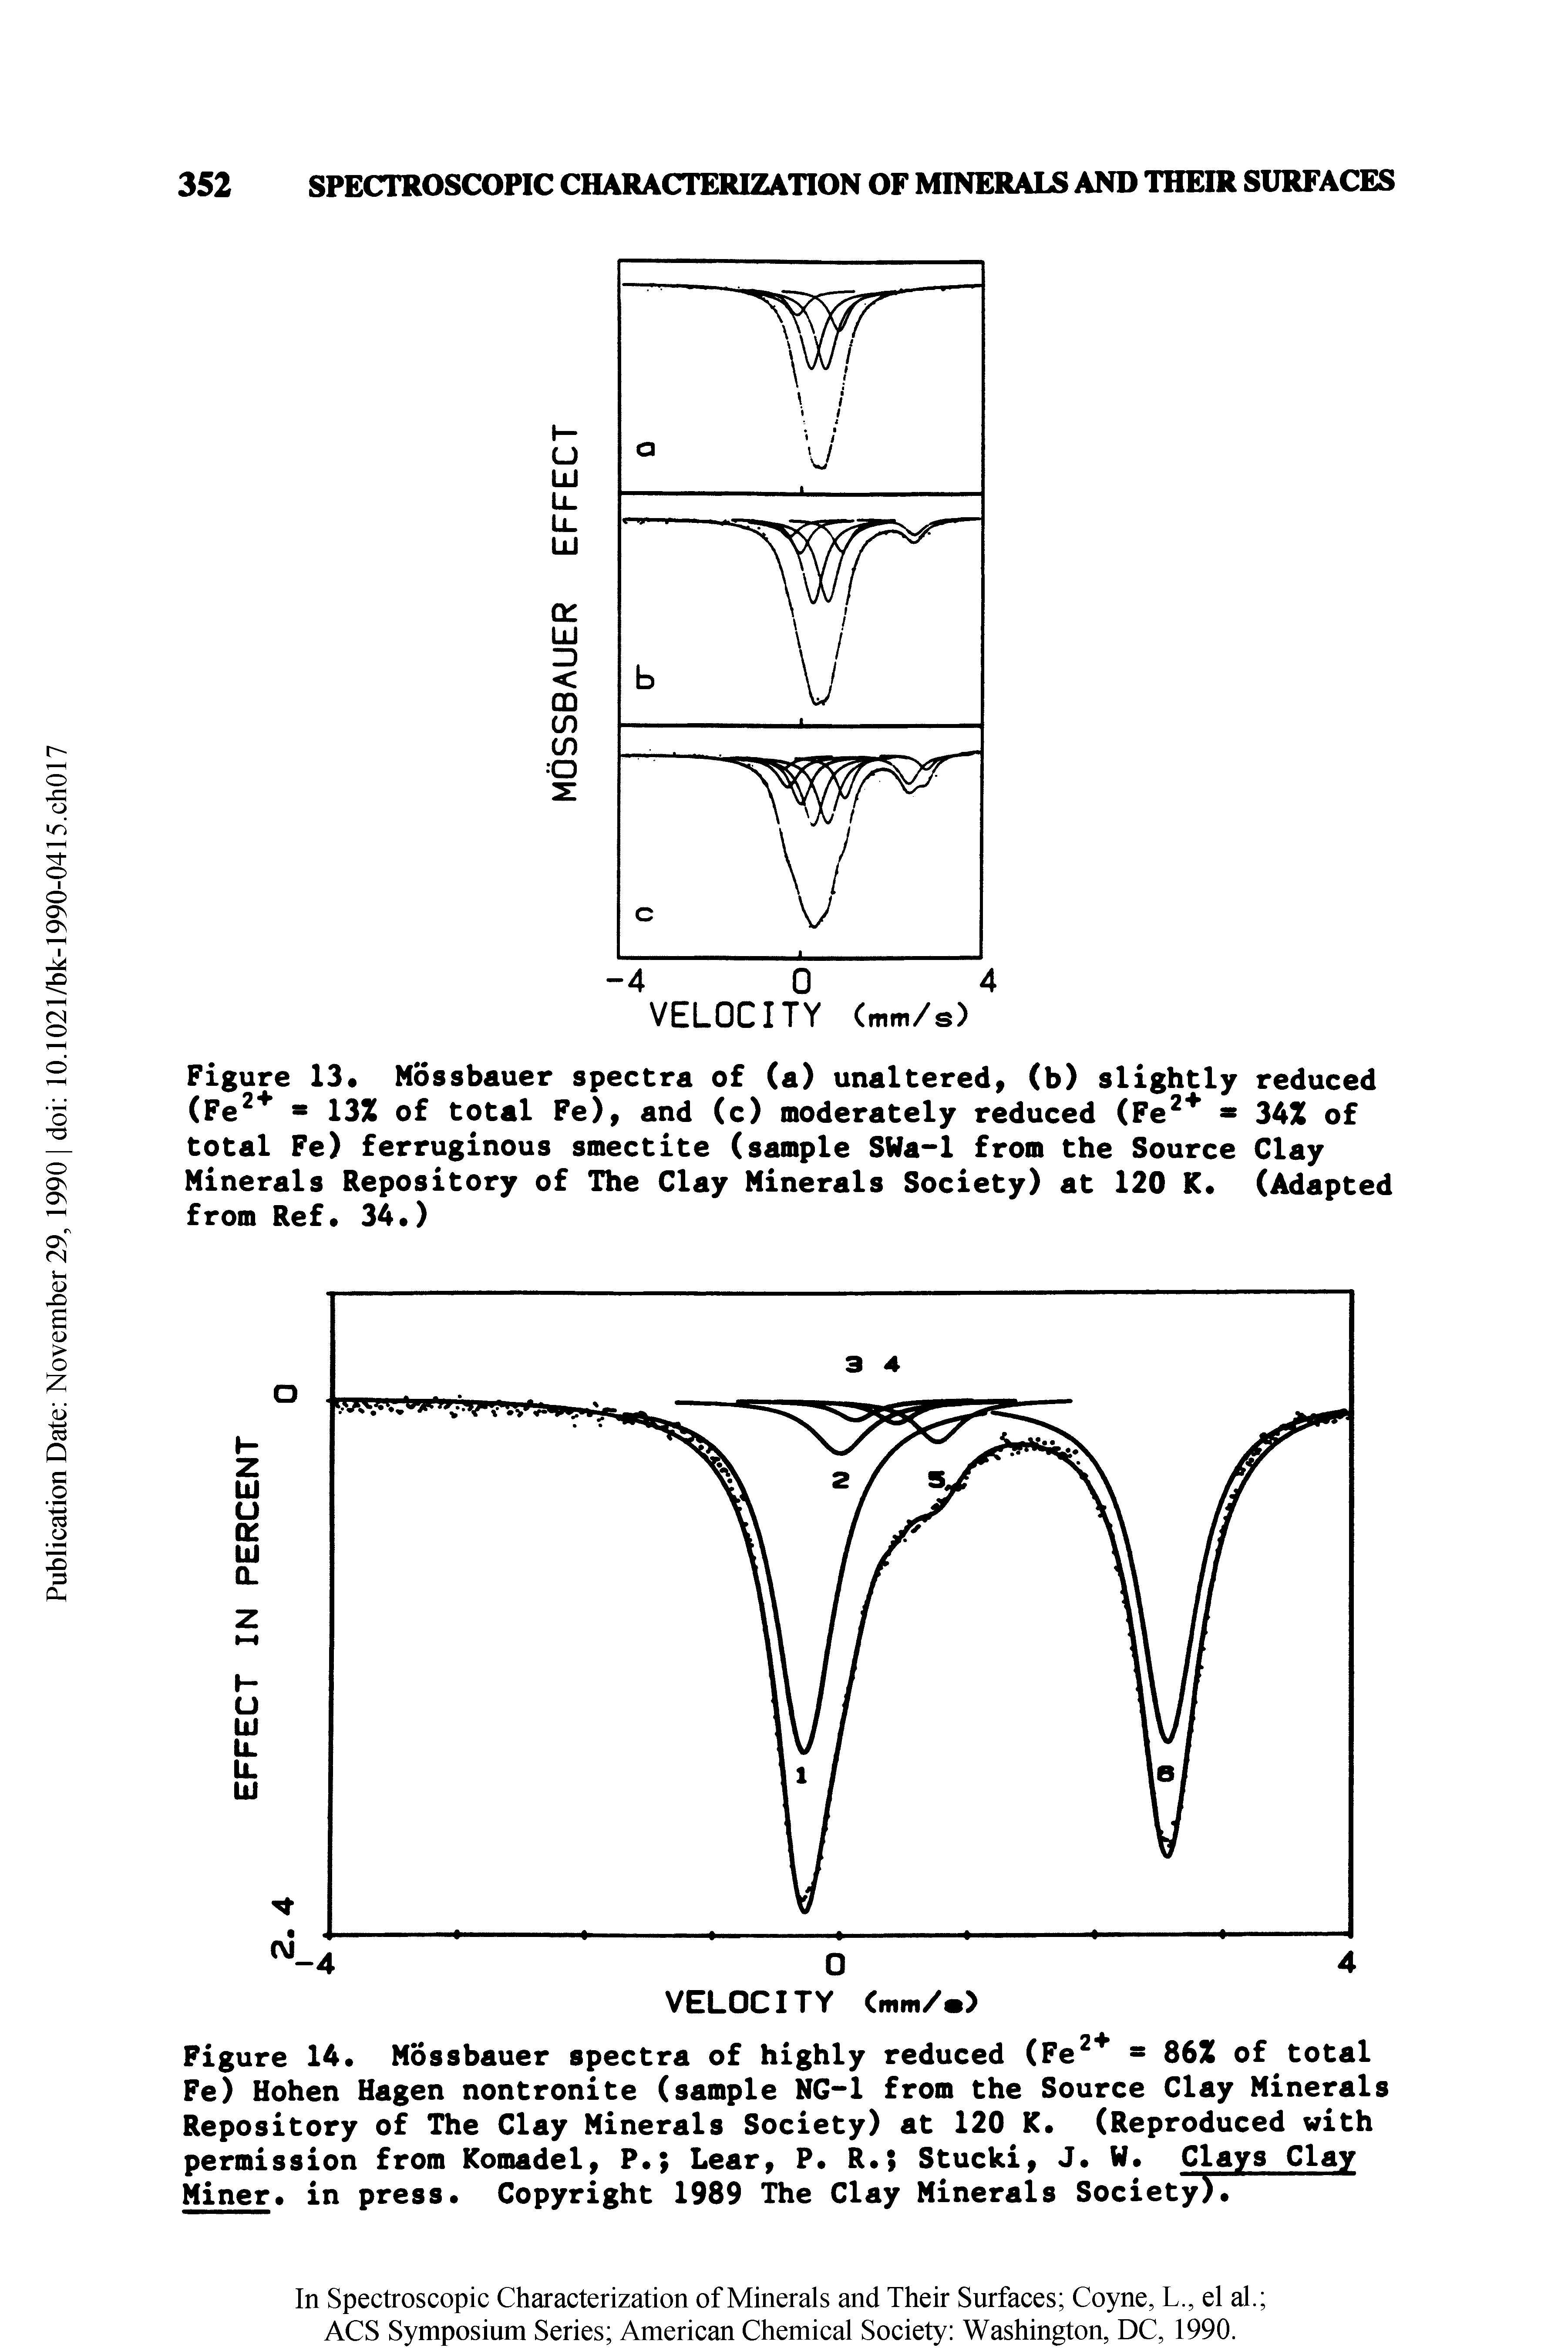 Figure 13 Mossbauer spectra of (a) unaltered, (b) slightly reduced (Fe2+ 88 13% of total Fe), and (c) moderately reduced (Pe2 34% of total Fe) ferruginous smectite (sample SWa-1 from the Source Clay Minerals Repository of The Clay Minerals Society) at 120 K. (Adapted from Ref. 34.)...